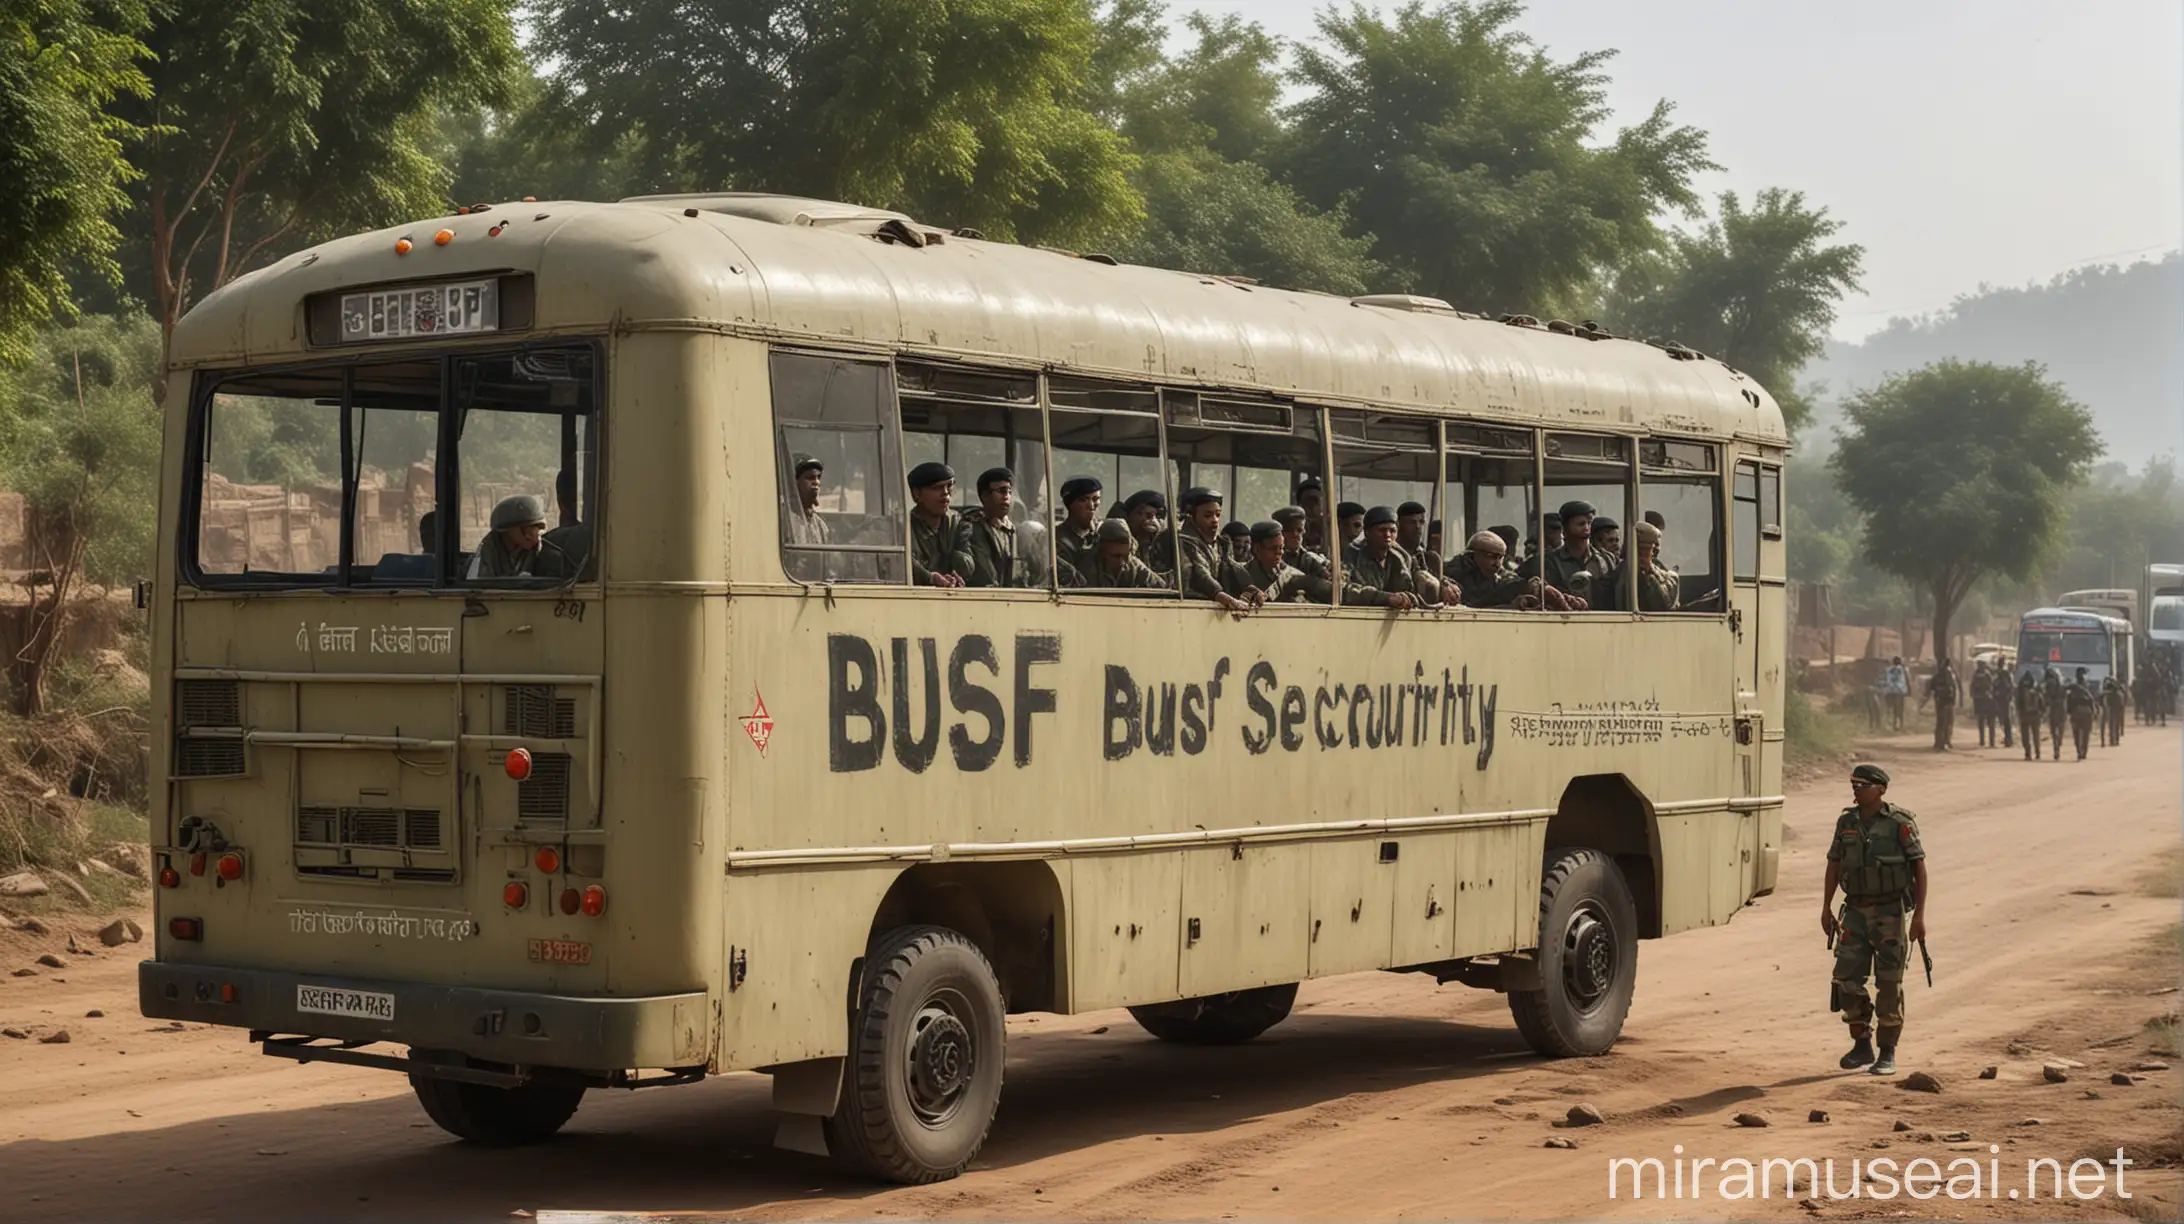 realistic ai image: bus of border security force, write 'bsf' on bus, village scene